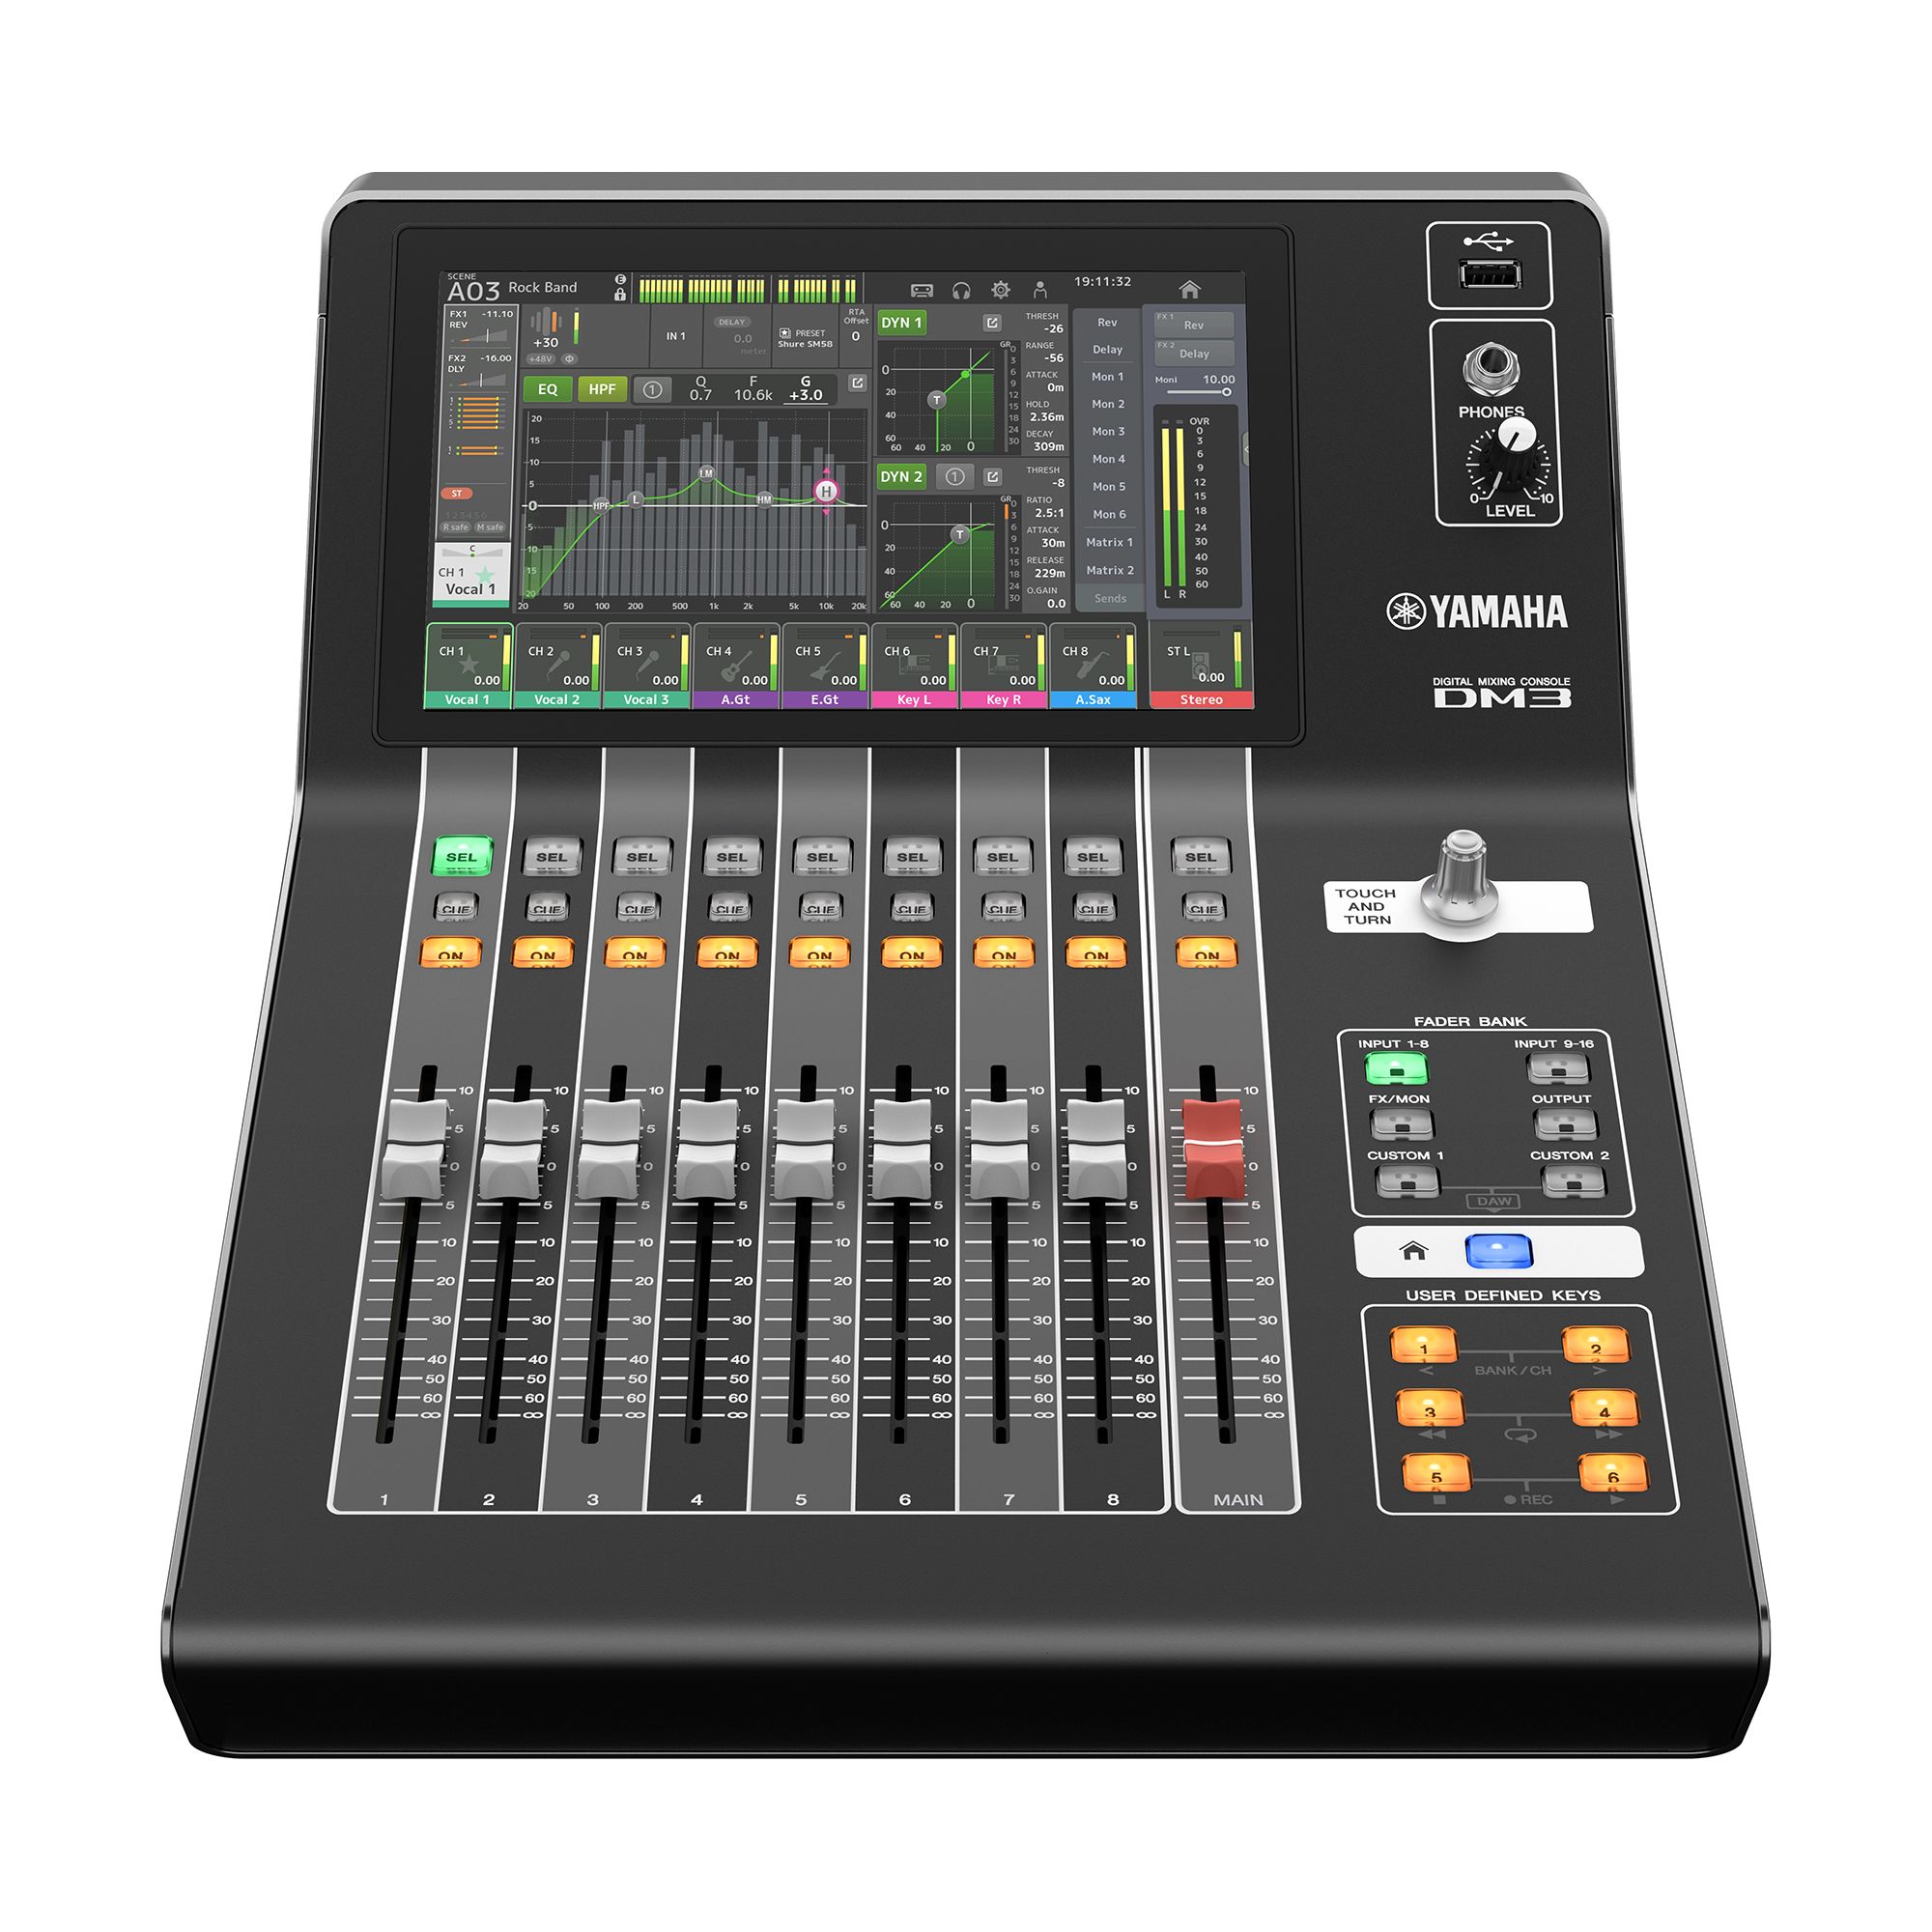 passe egoisme Biskop DM3 Series - Overview - Mixers - Professional Audio - Products - Yamaha -  Africa / Asia / CIS / Latin America / Middle East / Oceania